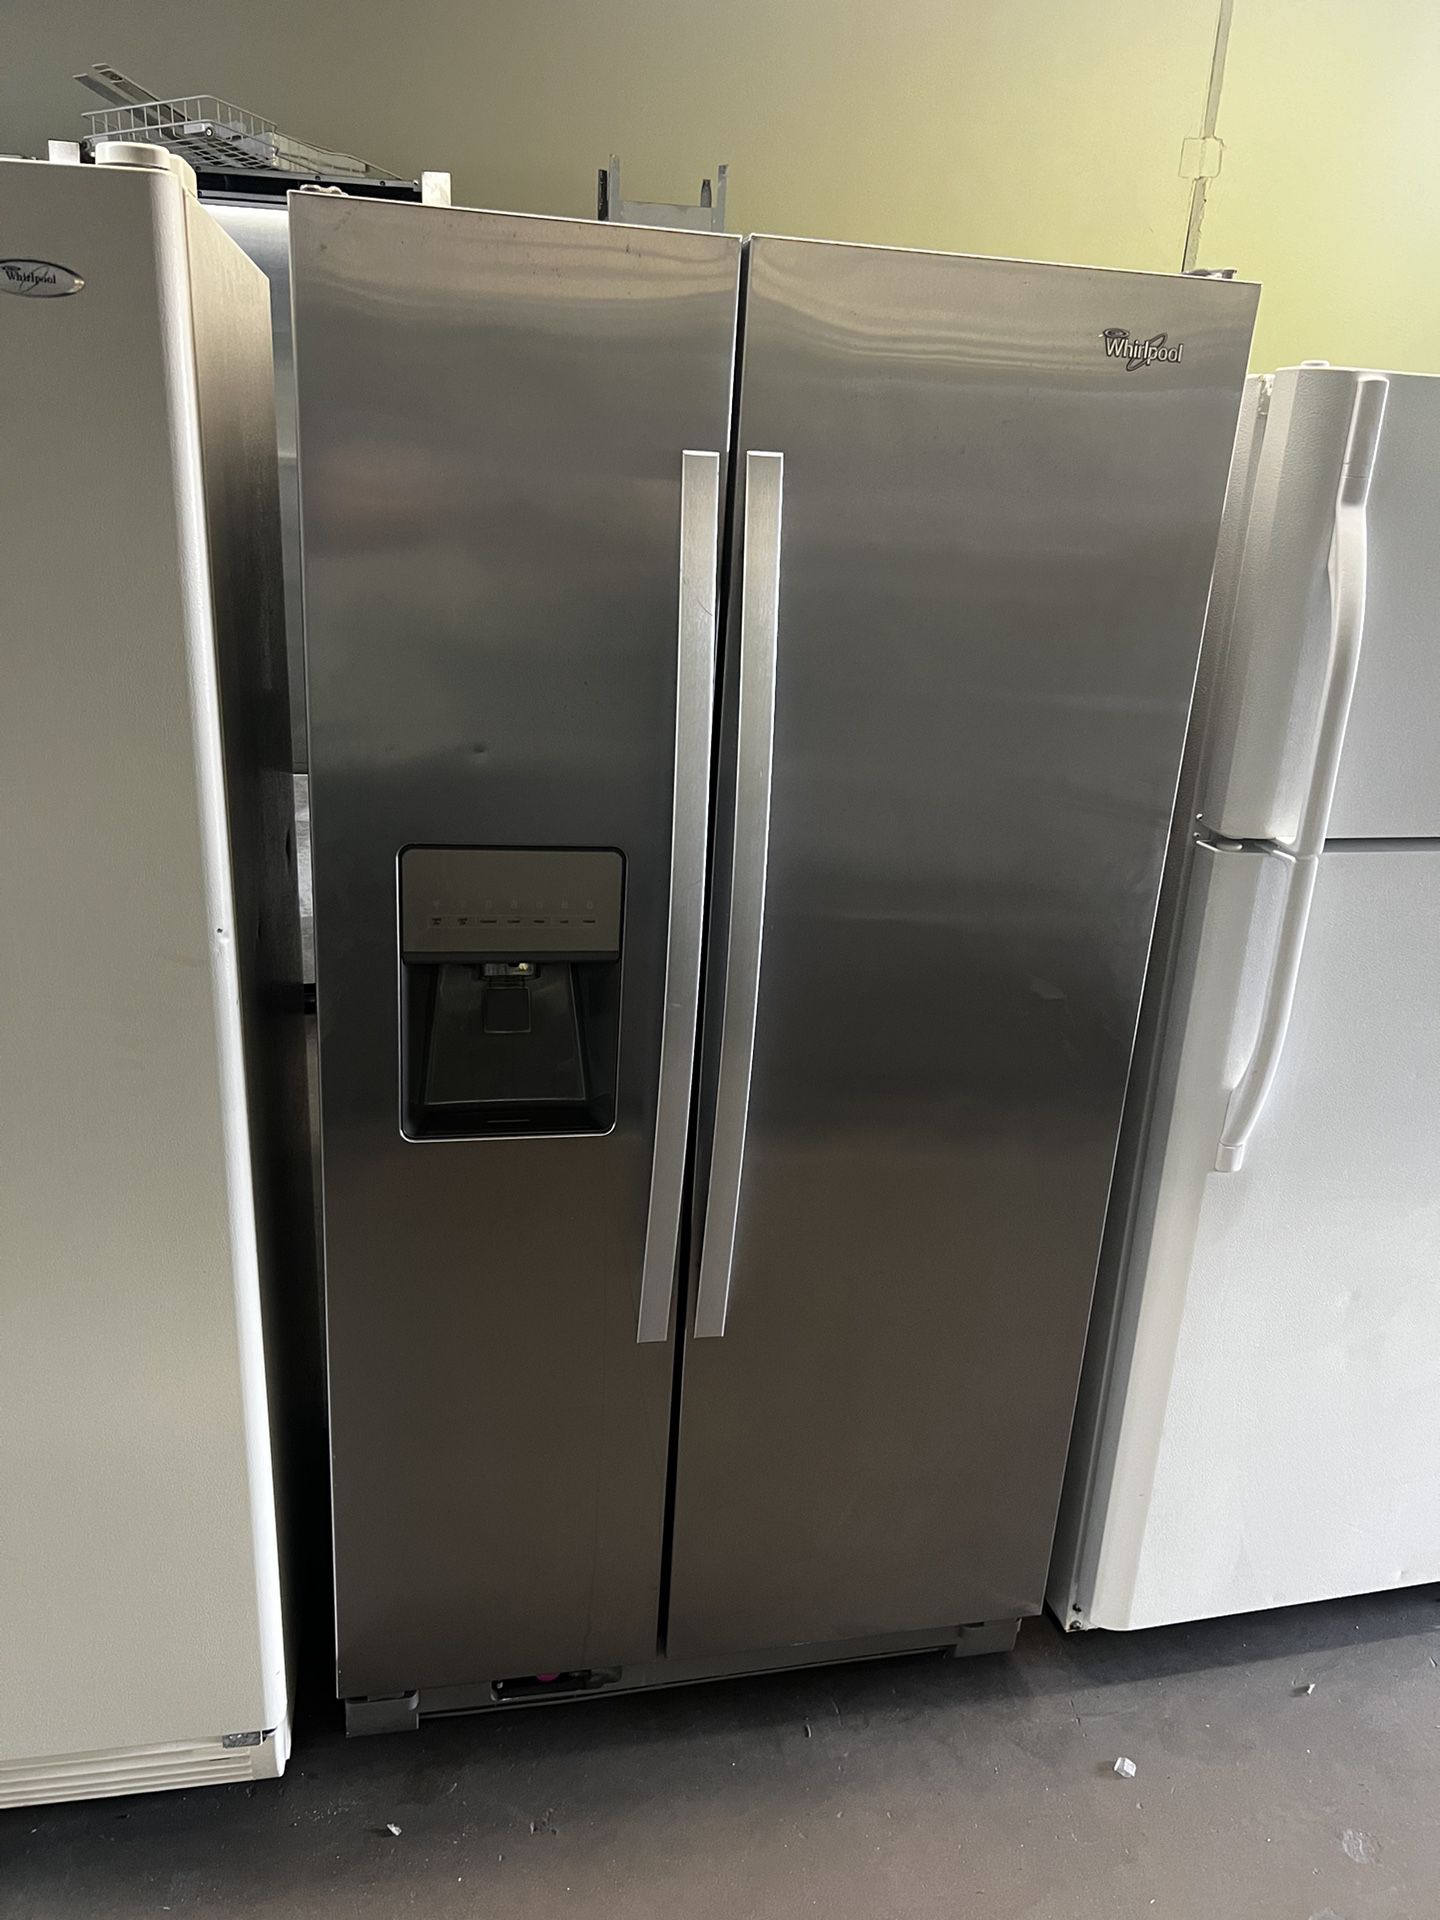 Whirlpool Stainless Steel Side By Side Refrigerator 